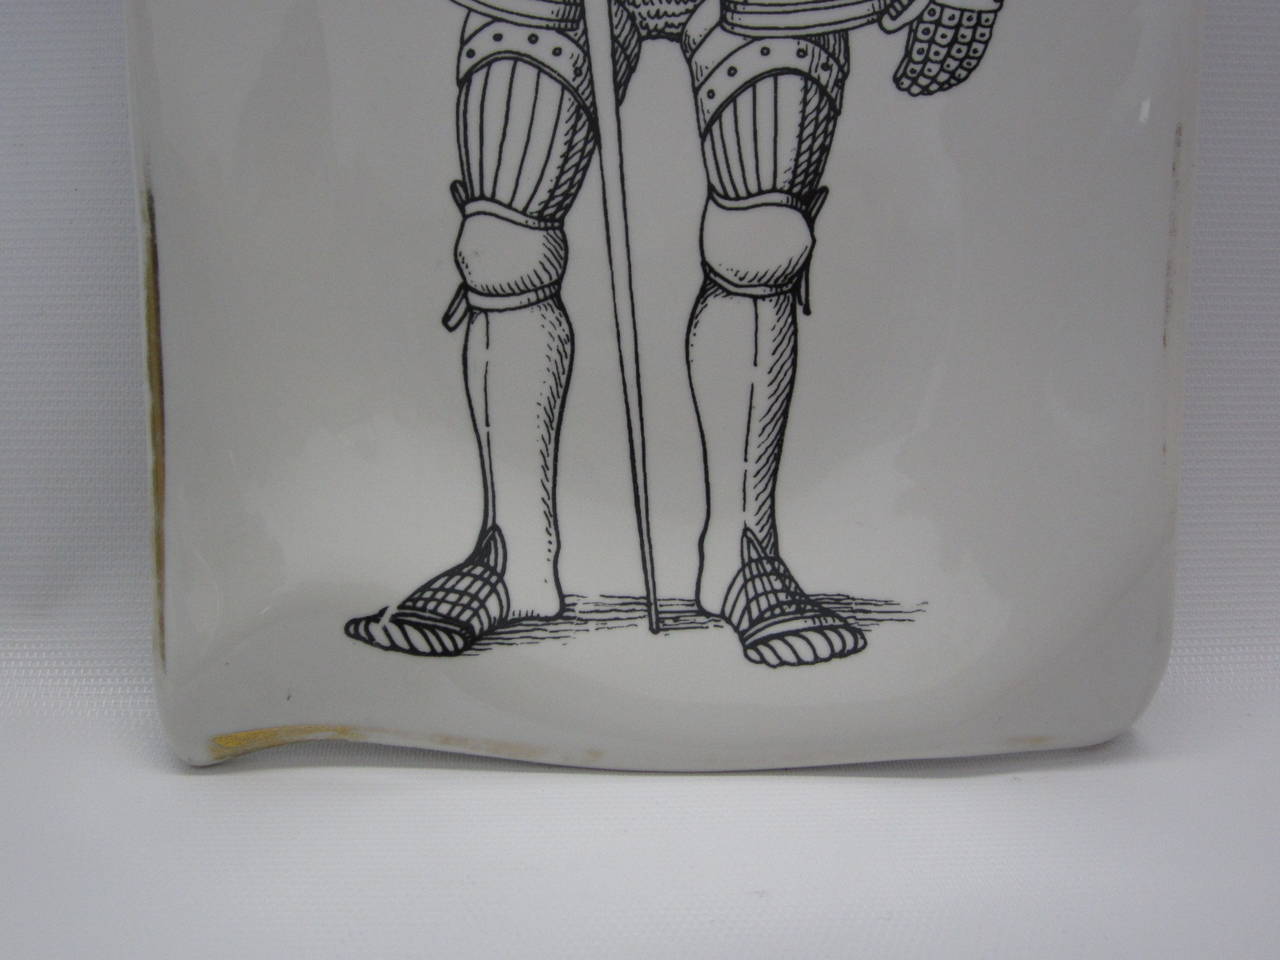 Italian Porcelain Turned-Edge Plate with Design by Piero Fornasetti for Felice Galbiati For Sale